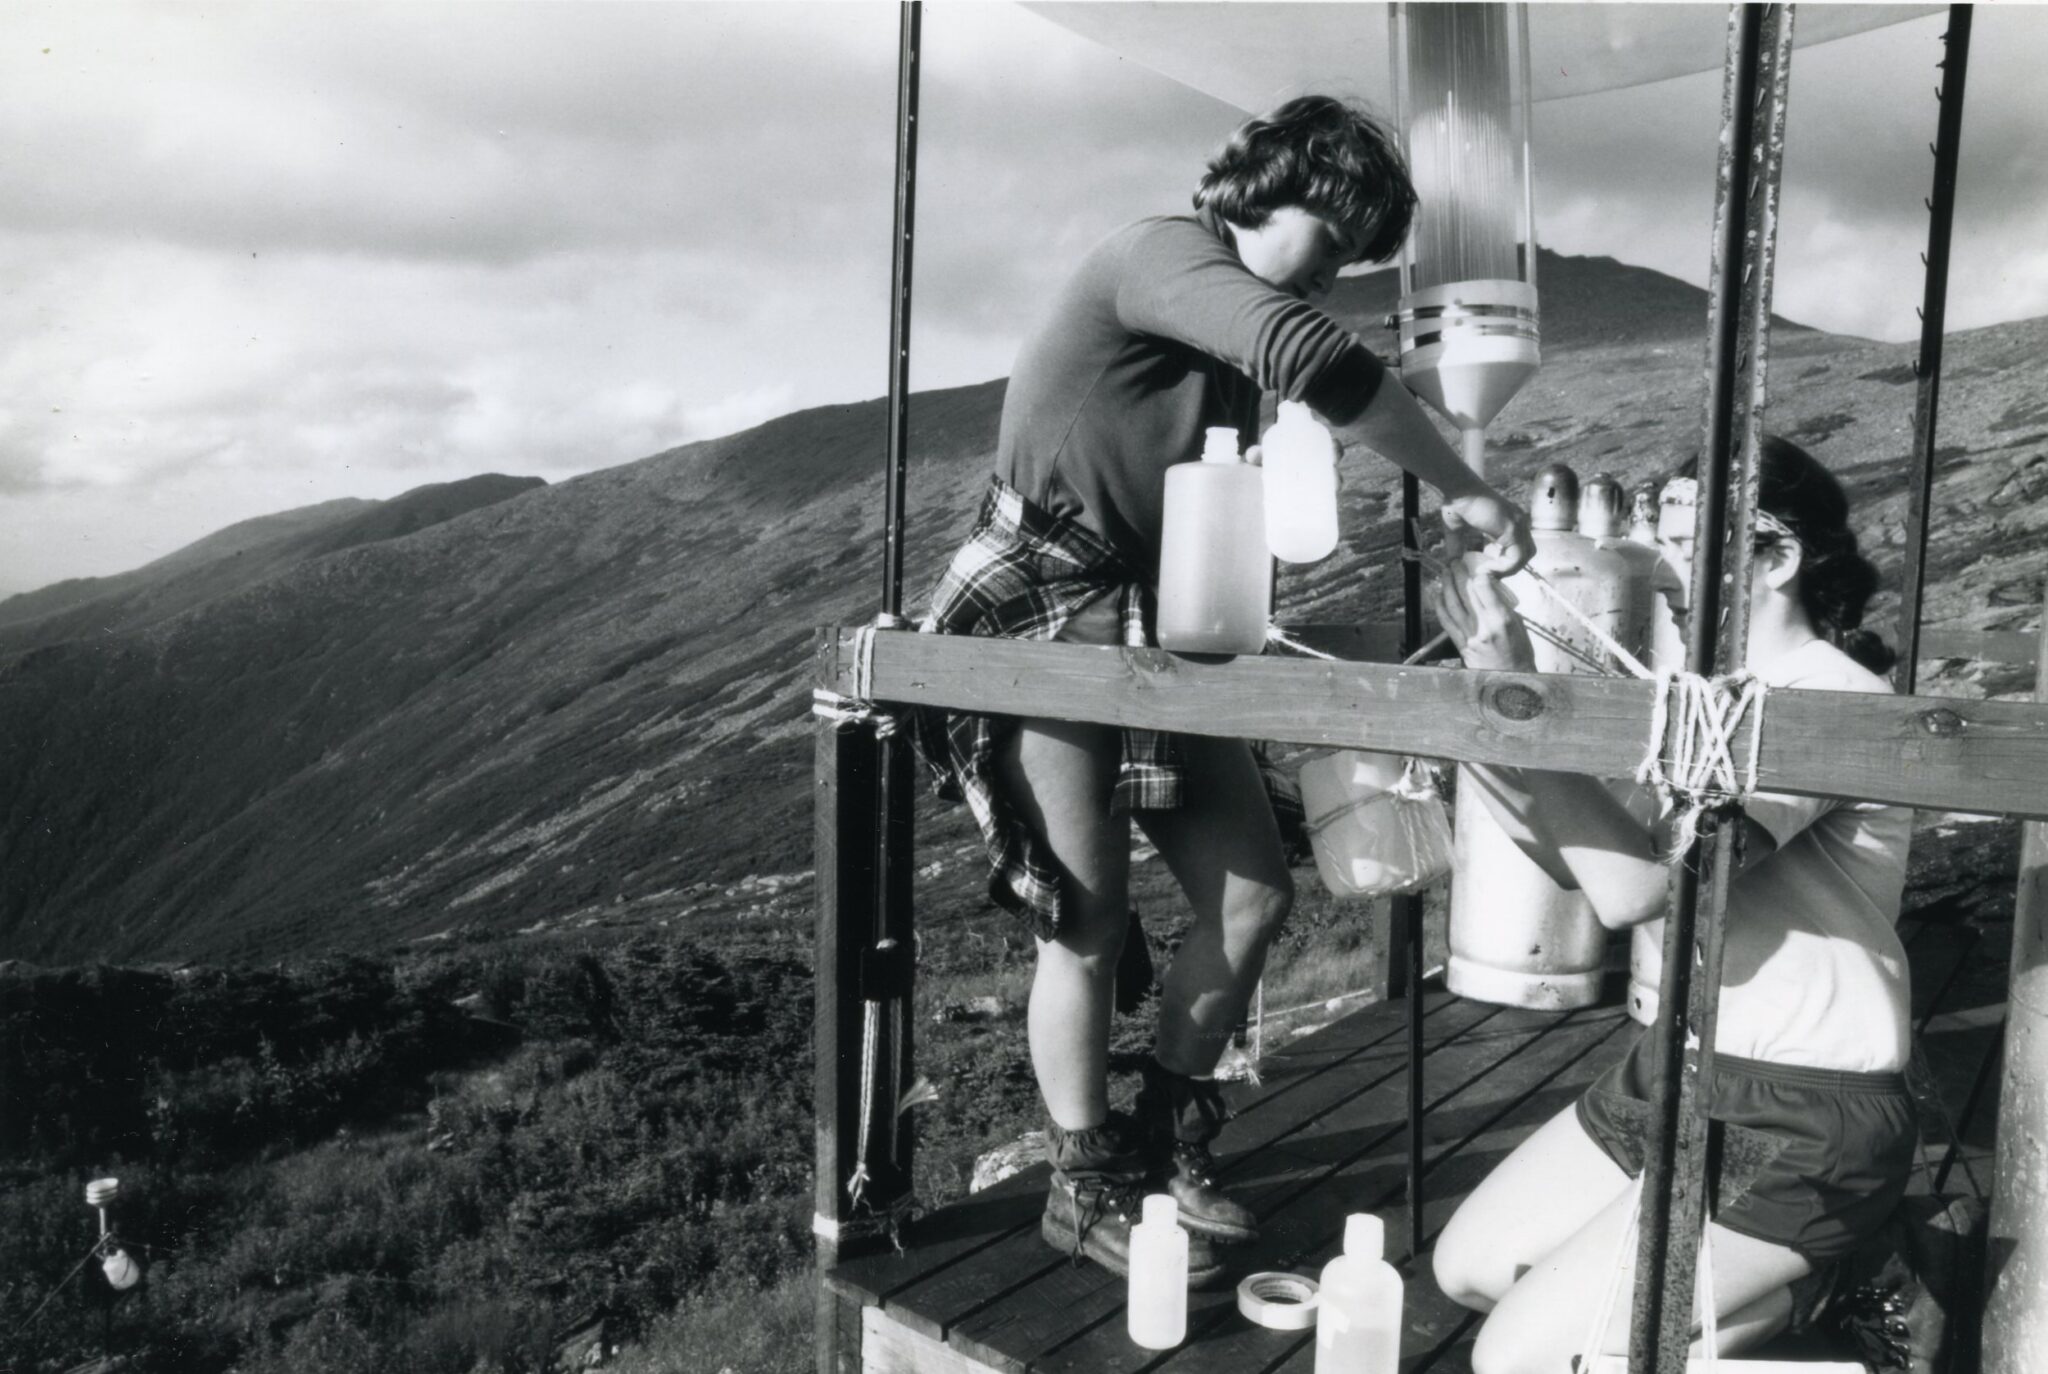 AMC ArchivesAMC has been monitoring climate change in the White Mountains for decades. In this photo from the 1980s, a research assistant measures air quality at Lakes of the Clouds Hut.